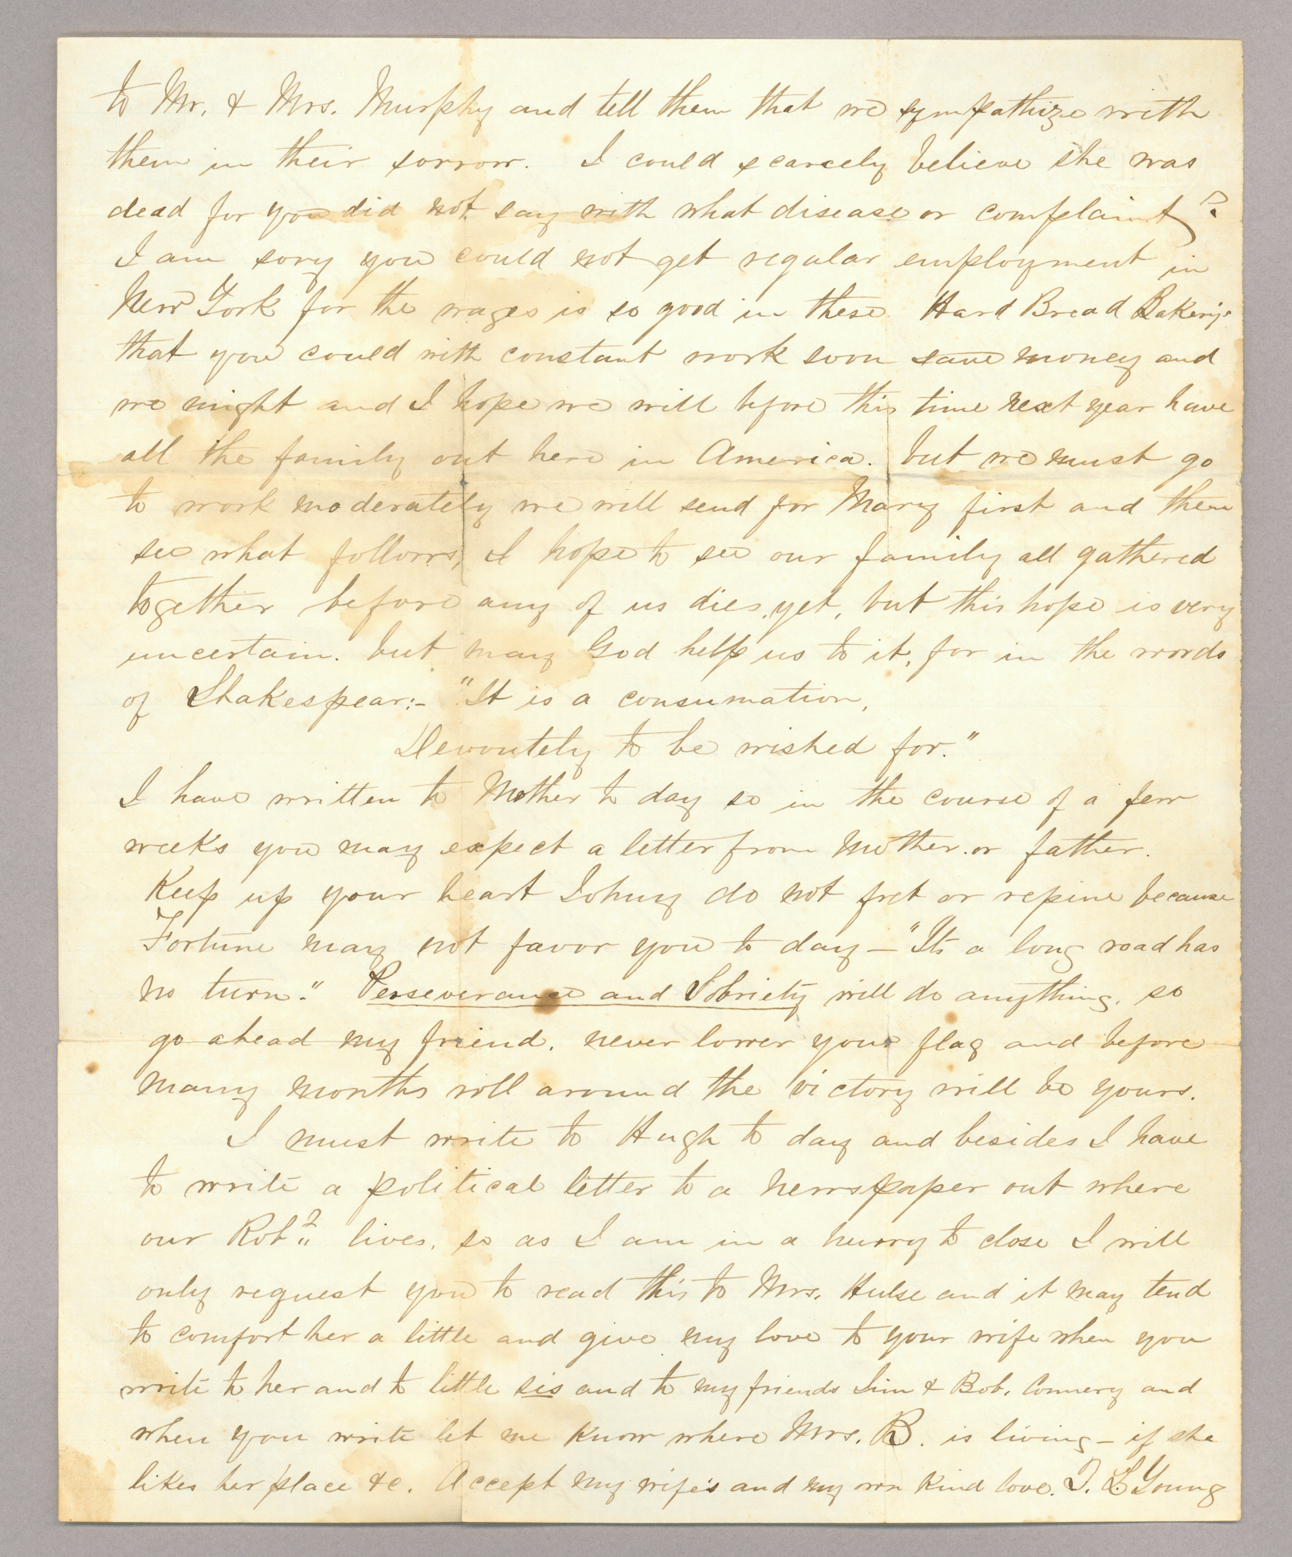 Letter. T[homas] L[owry] Young, New London, Connecticut, to "My Dear John" [John E. Brownlee], n. p., Page 2